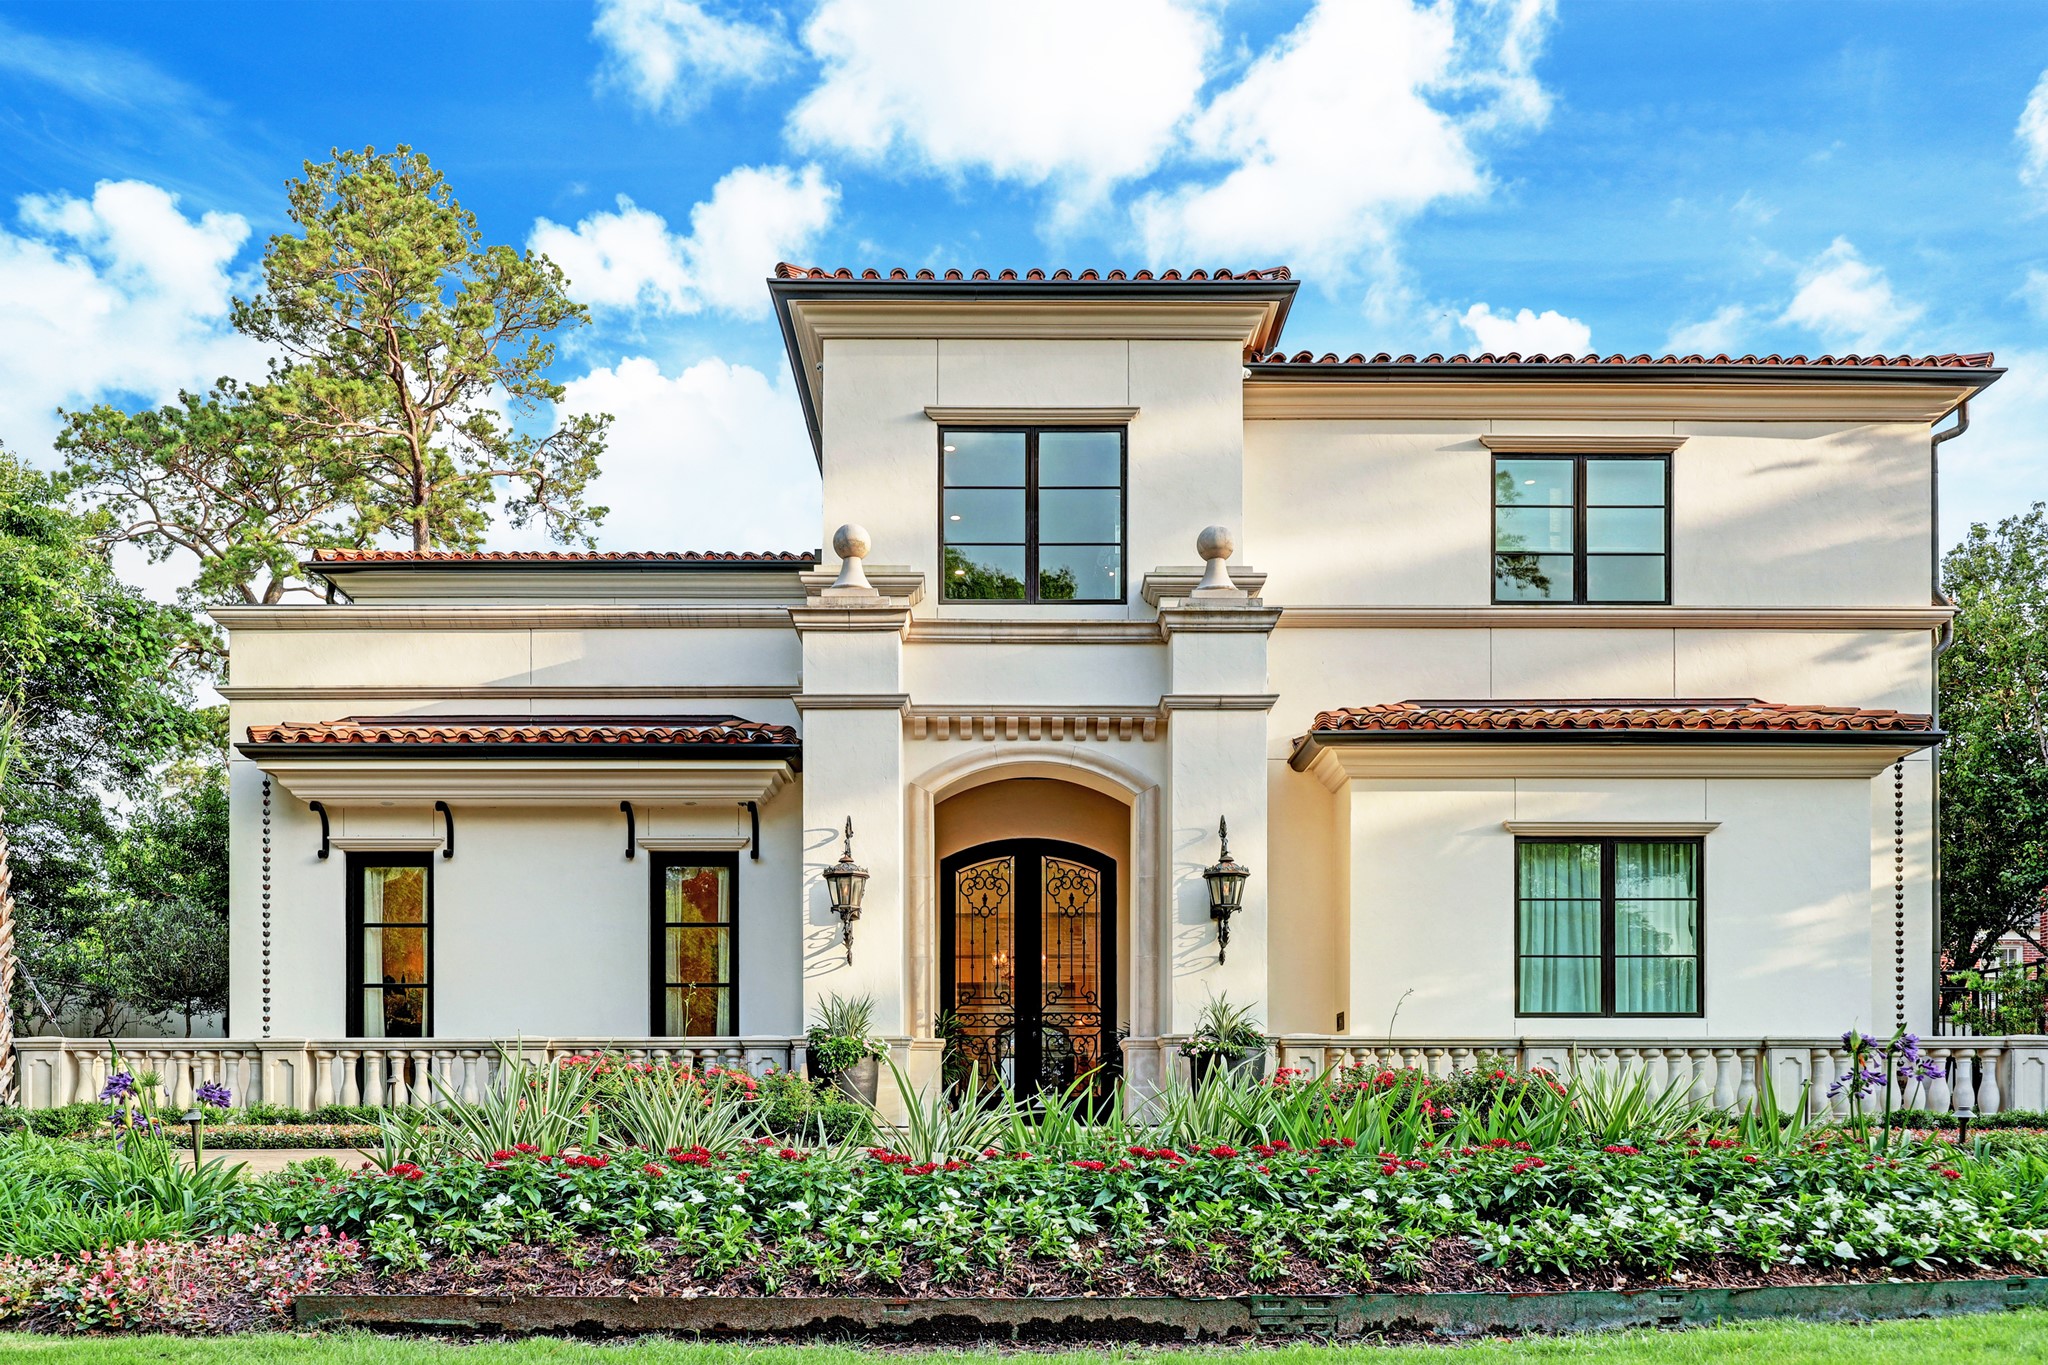 [Front Elevation]
Exterior appointments include handmade, number 5-rated Mexican terra cotta roof tiles; True Stucco exterior cladding; wrought iron window accents and balconets; and designer gas lanterns